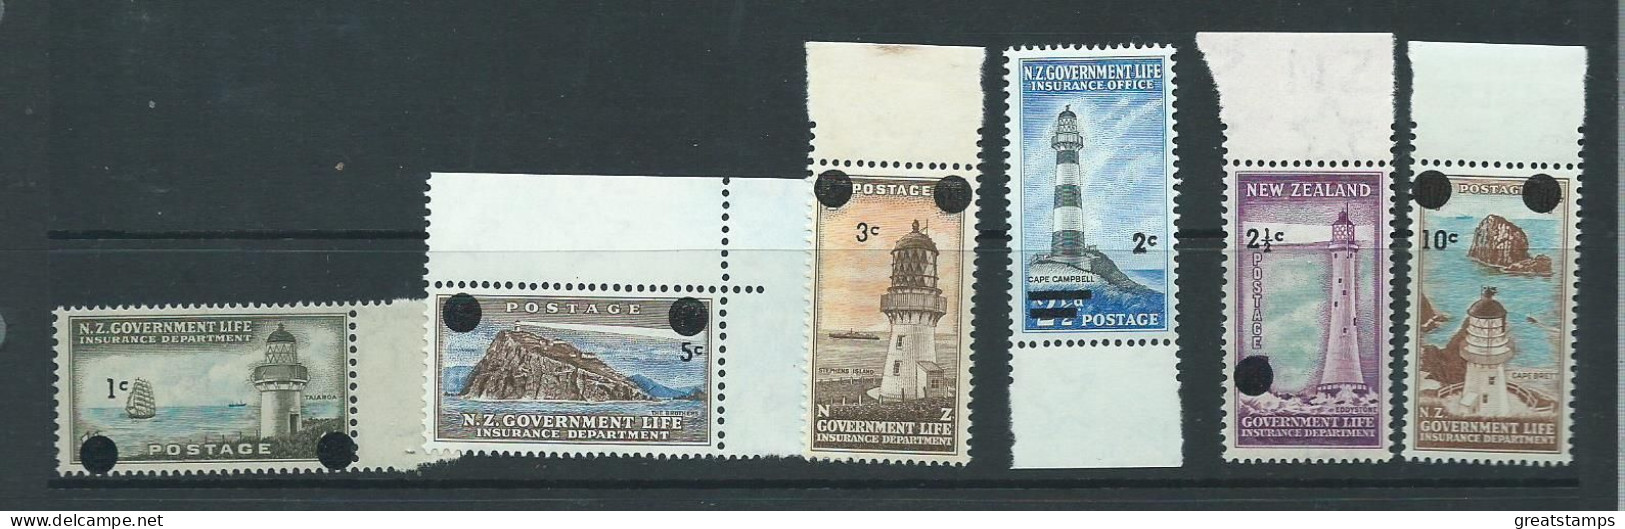 New Zealand Stamps Life Insurance Lighthouse1967 Mnh Set Surcharges - Nuevos